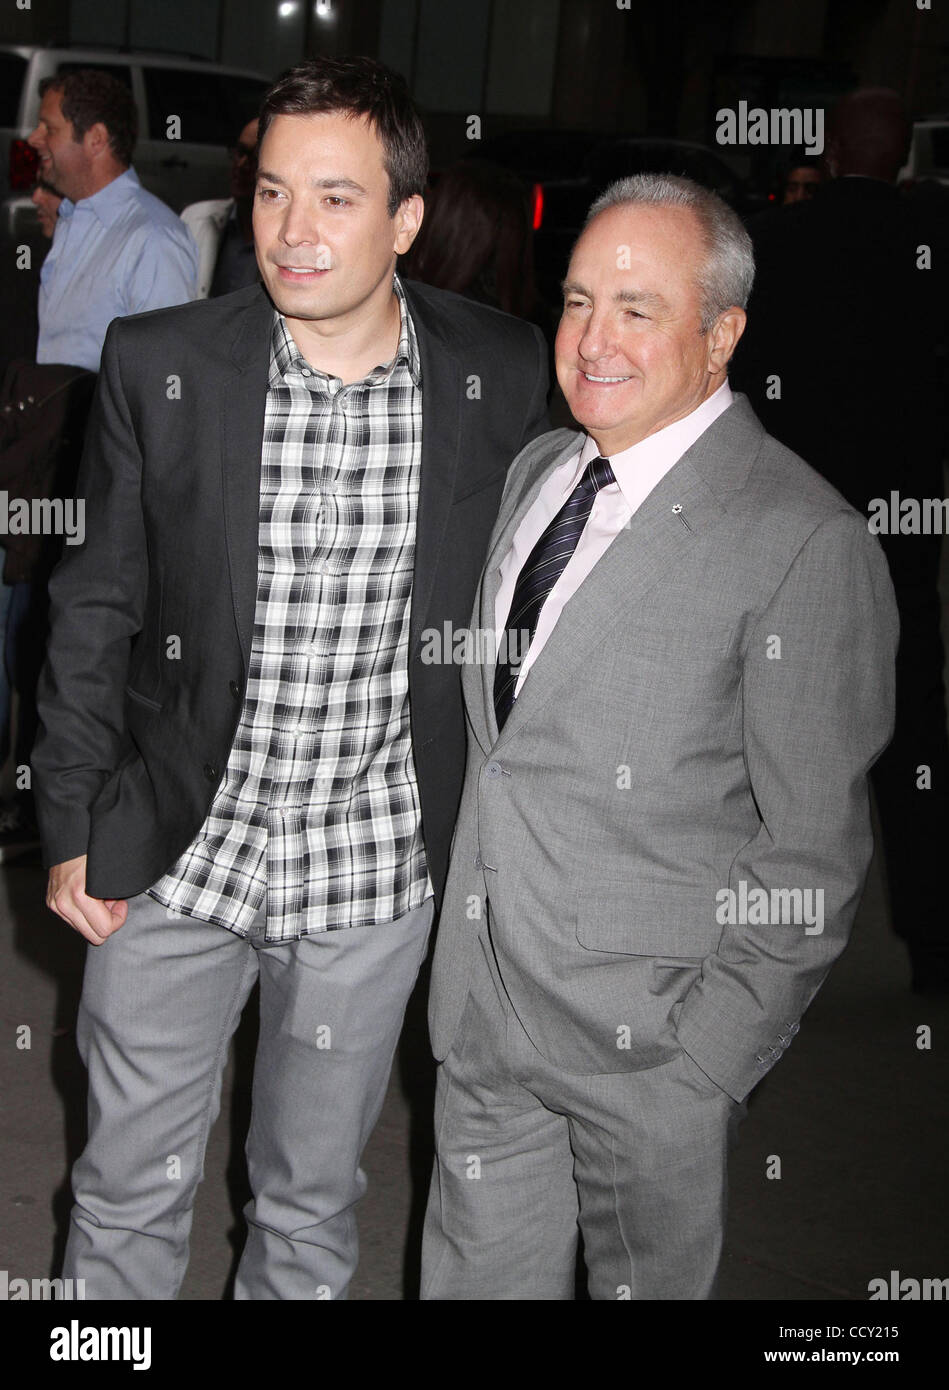 Late night talk show host JIMMY FALLON and SLN creator LORNE MICHAELS attend the premiere of the Rolling Stones new documentary 'Stones In Exile' held the Museum of Modern Art. Stock Photo